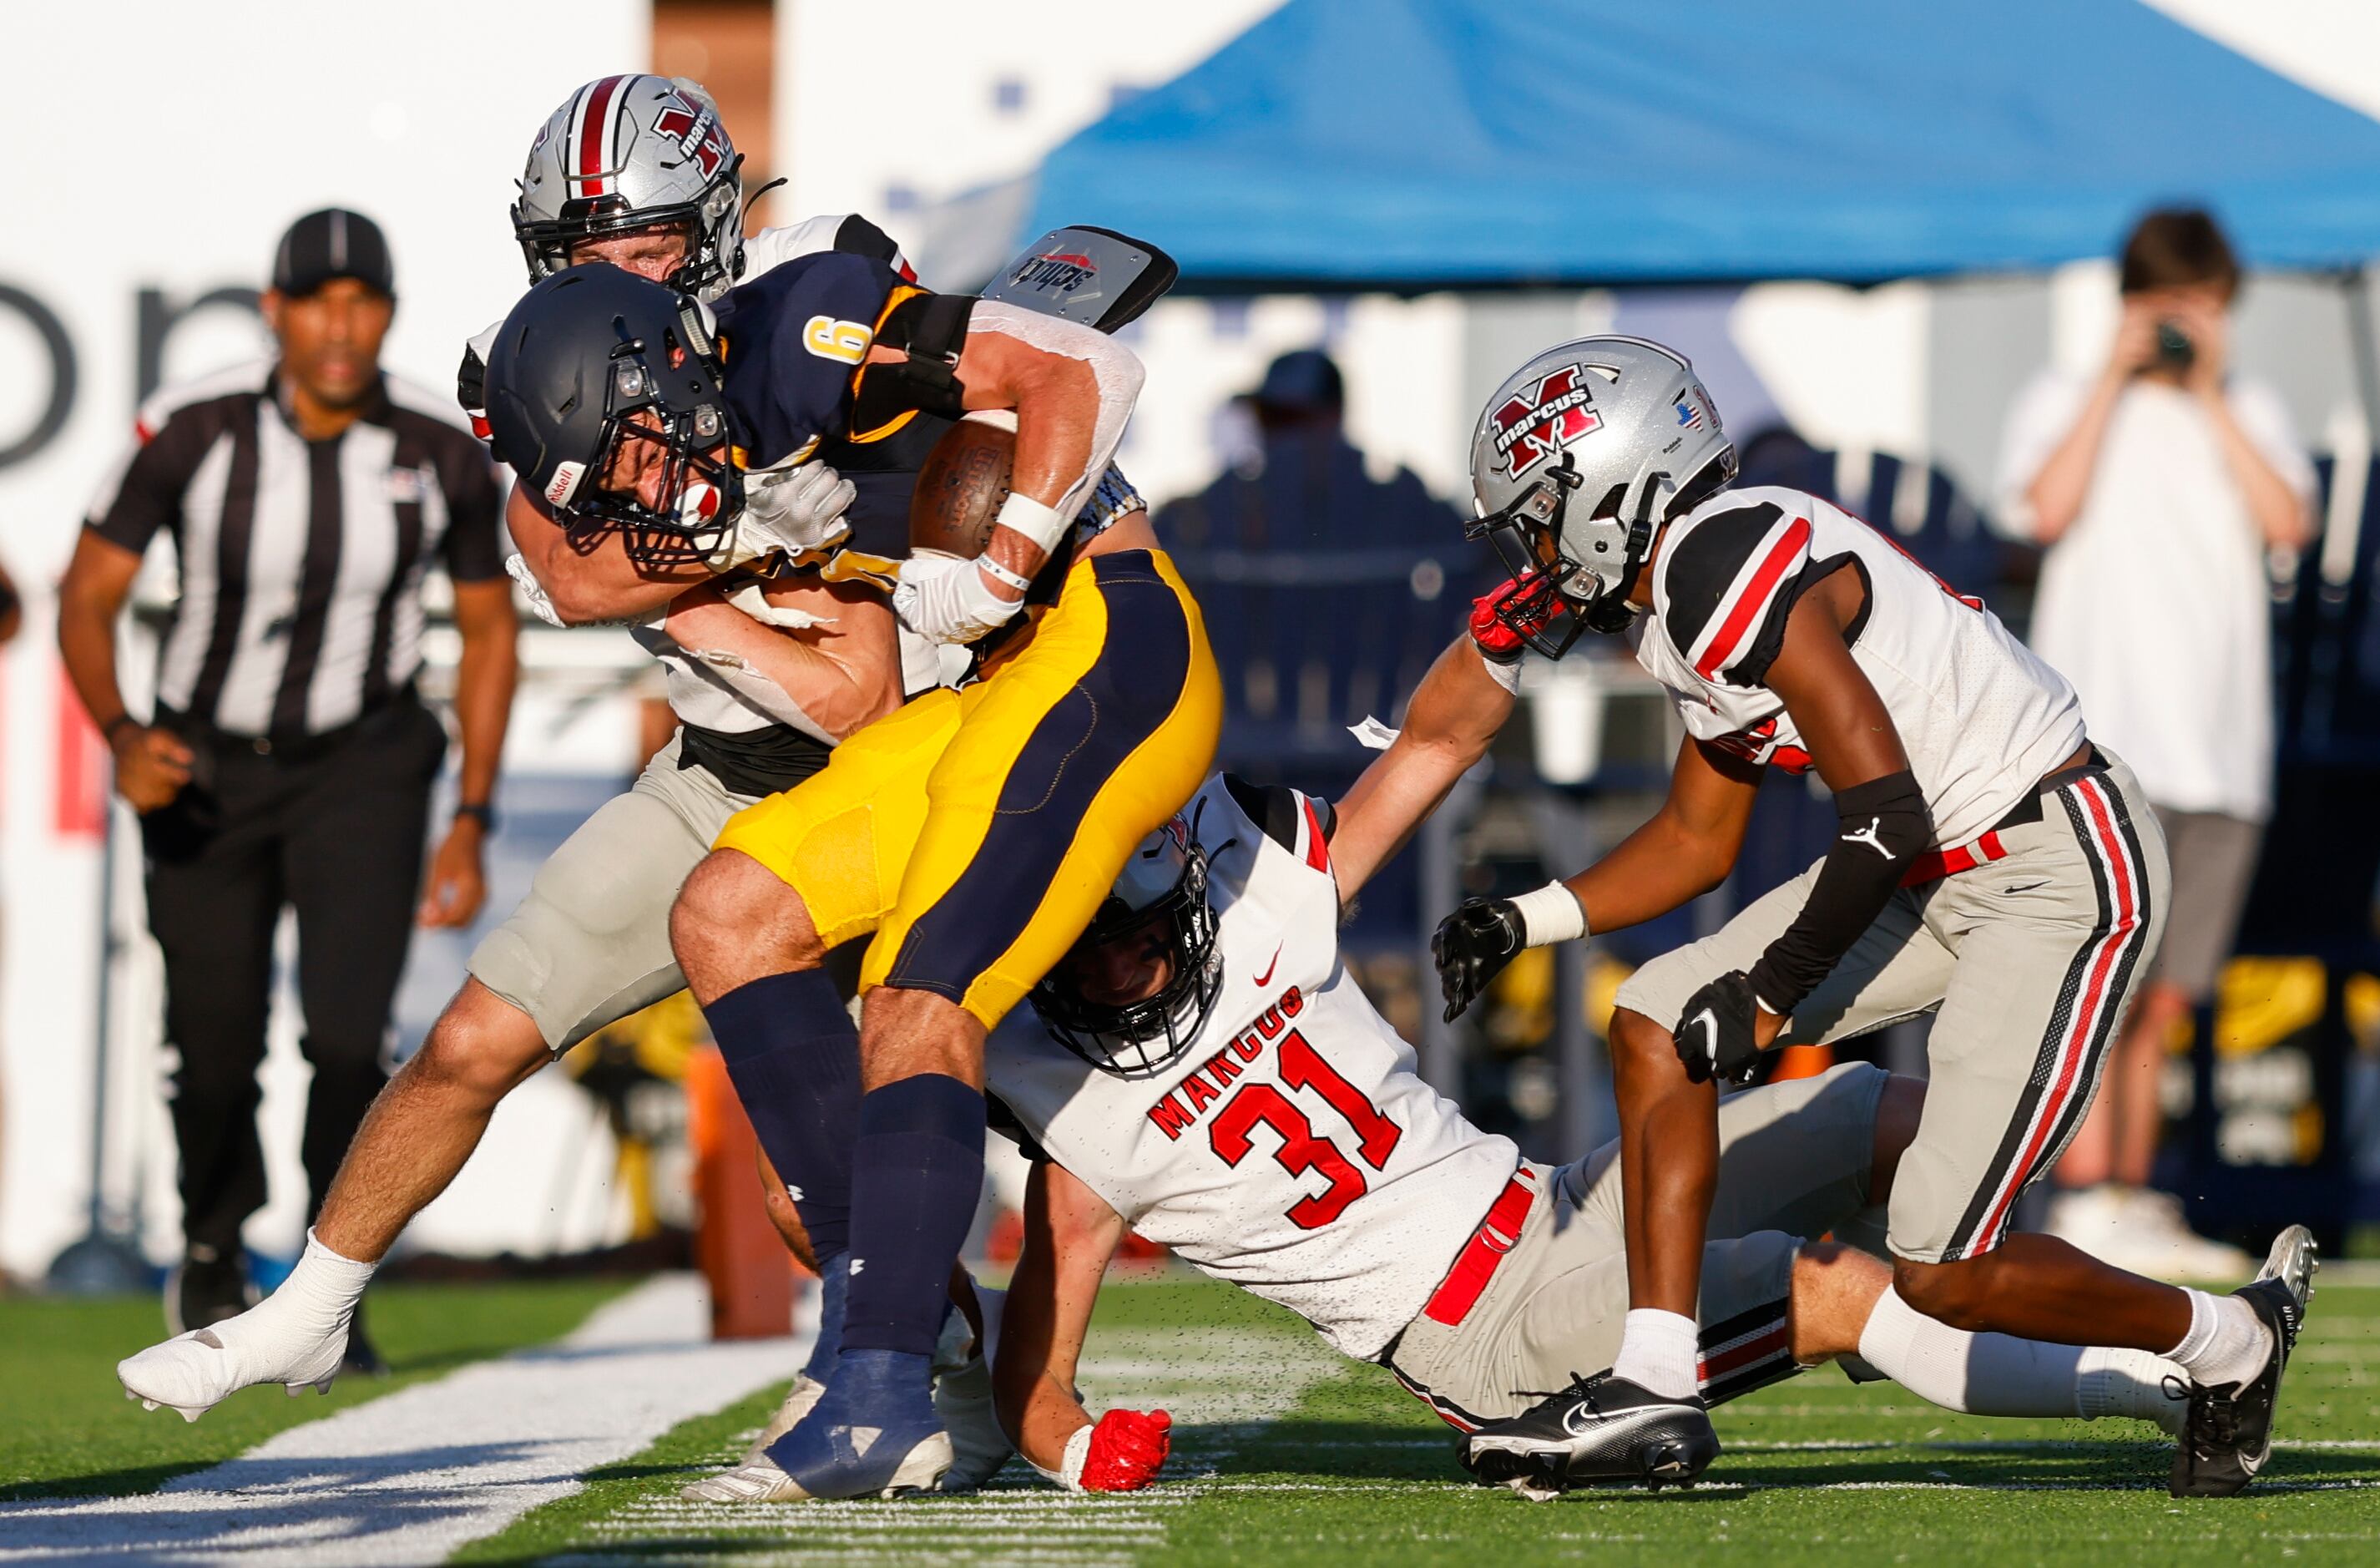 Highland Park wide receiver Luke Herring is brought down by the Flower Mound Marcus defense...